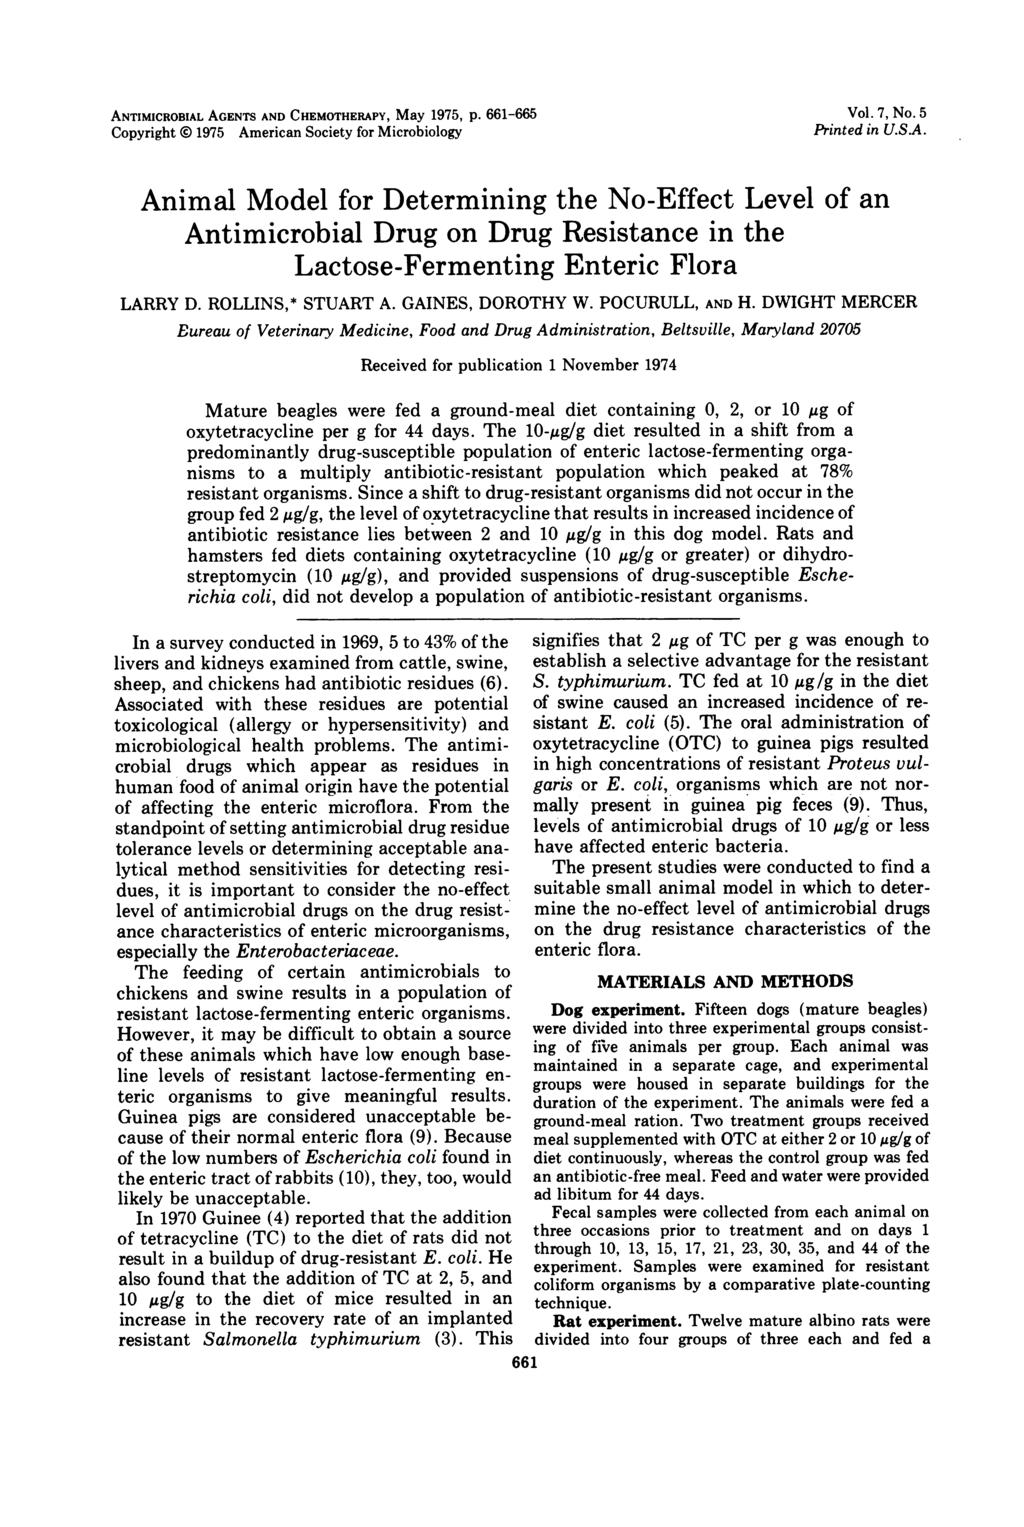 ANTIMICROBIAL AGENTS AND CHEMOTHERAPY, May 1975, p. 661-665 Copyright O 1975 American Society for Microbiology Vol. 7, No. 5 Printed in U.S.A. Animal Model for Determining the No-Effect Level of an Antimicrobial Drug on Drug Resistance in the Lactose-Fermenting Enteric Flora LARRY D.